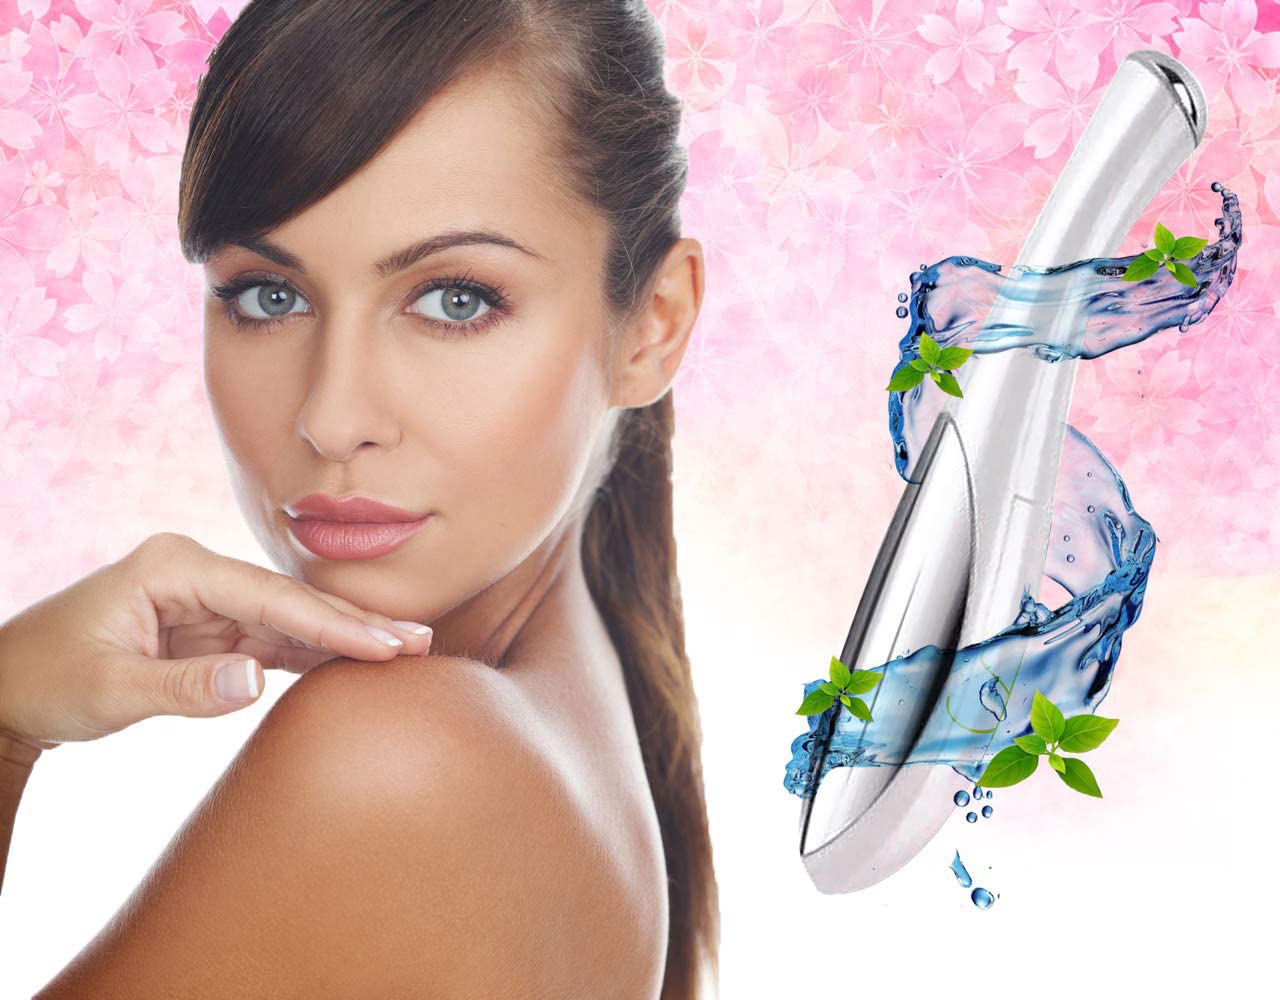 Swiss Botany Beauty 1 / 1 Ionic Wrinkle Therapy Wand High Frequency Skin Tightening Wrinkle Reducing Dark Circle Puffy Eye Treatment allows skin serums 30% deeper penetration